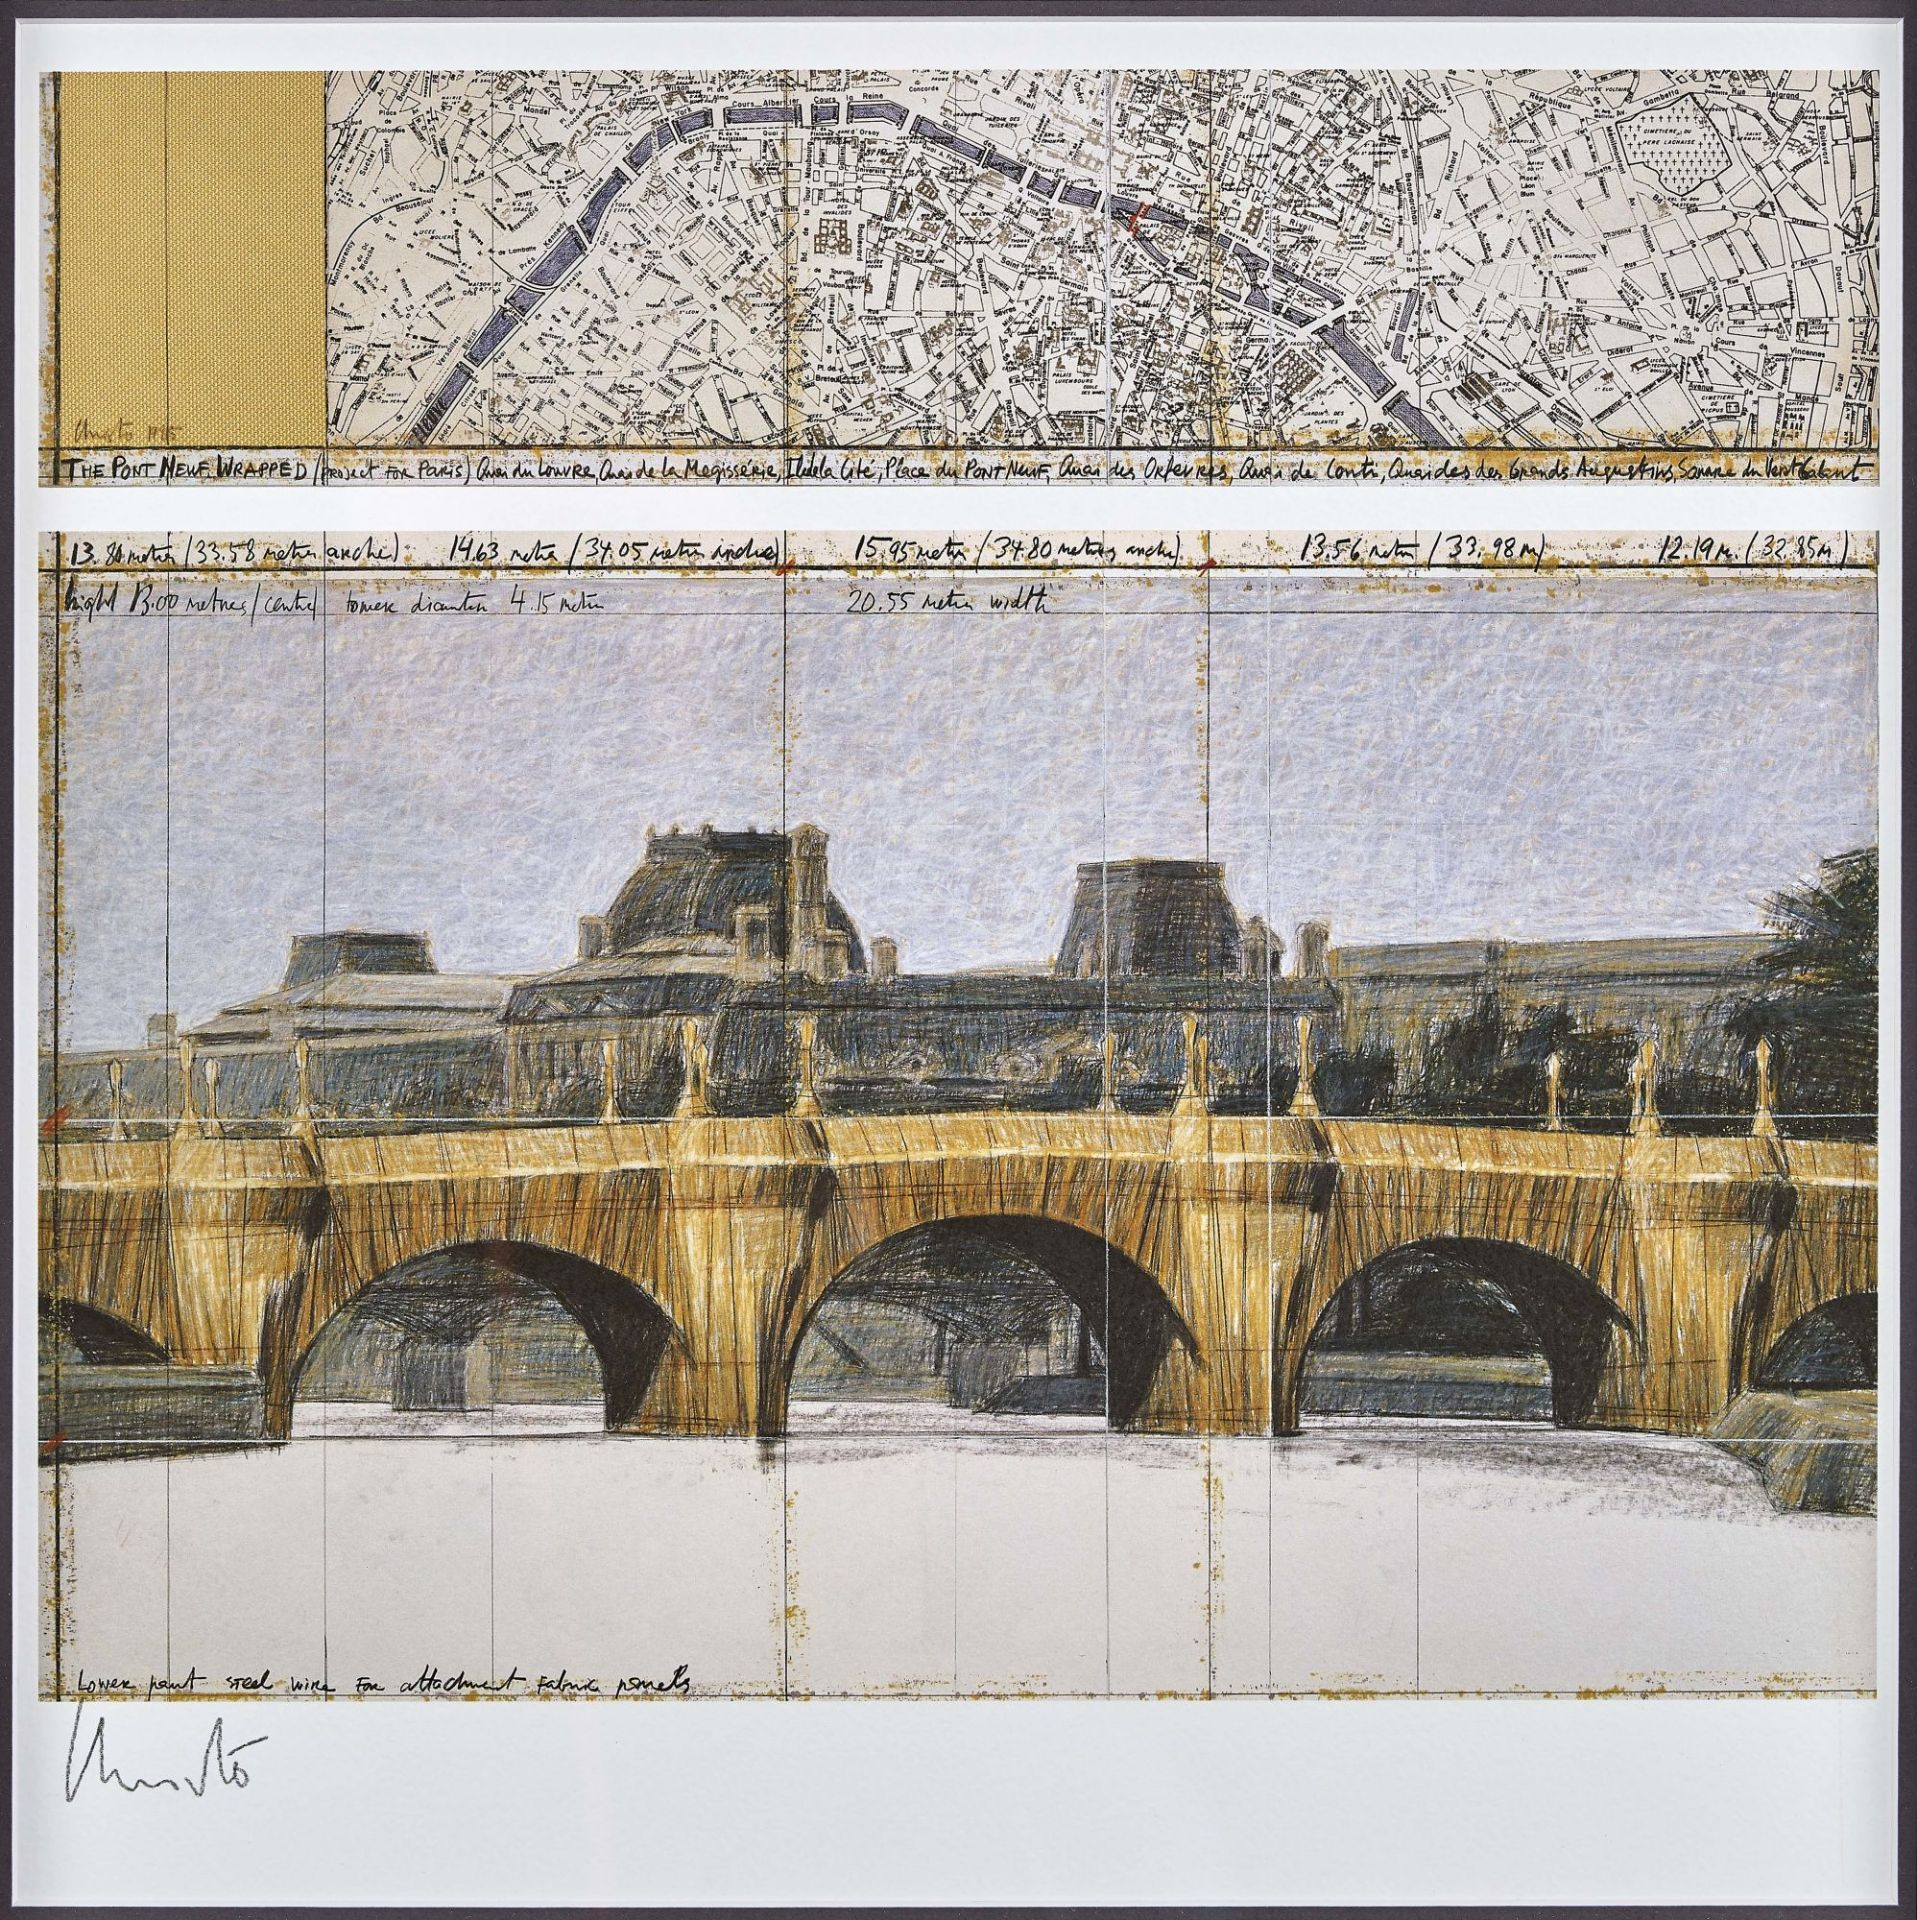 CHRISTO (EIGTL. JAVACHEFF, CHRISTO): "The Pont Neuf Wrapped (Project for Paris)".